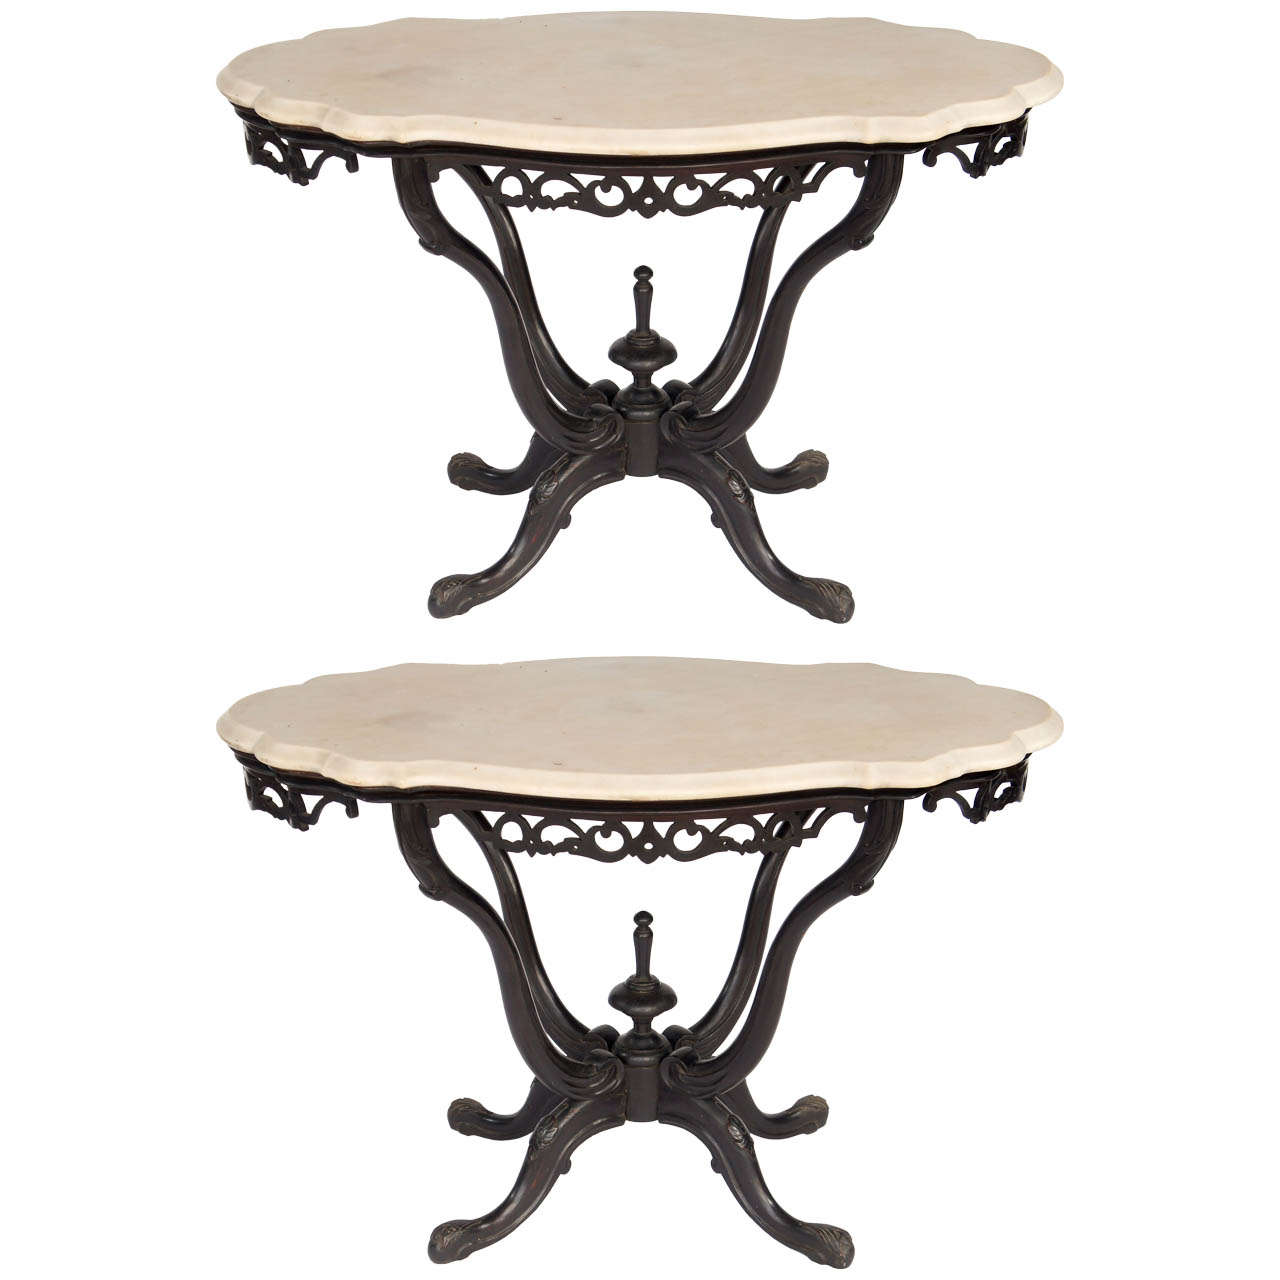 Pair of 19th Century Anglo-Indian Center Tables